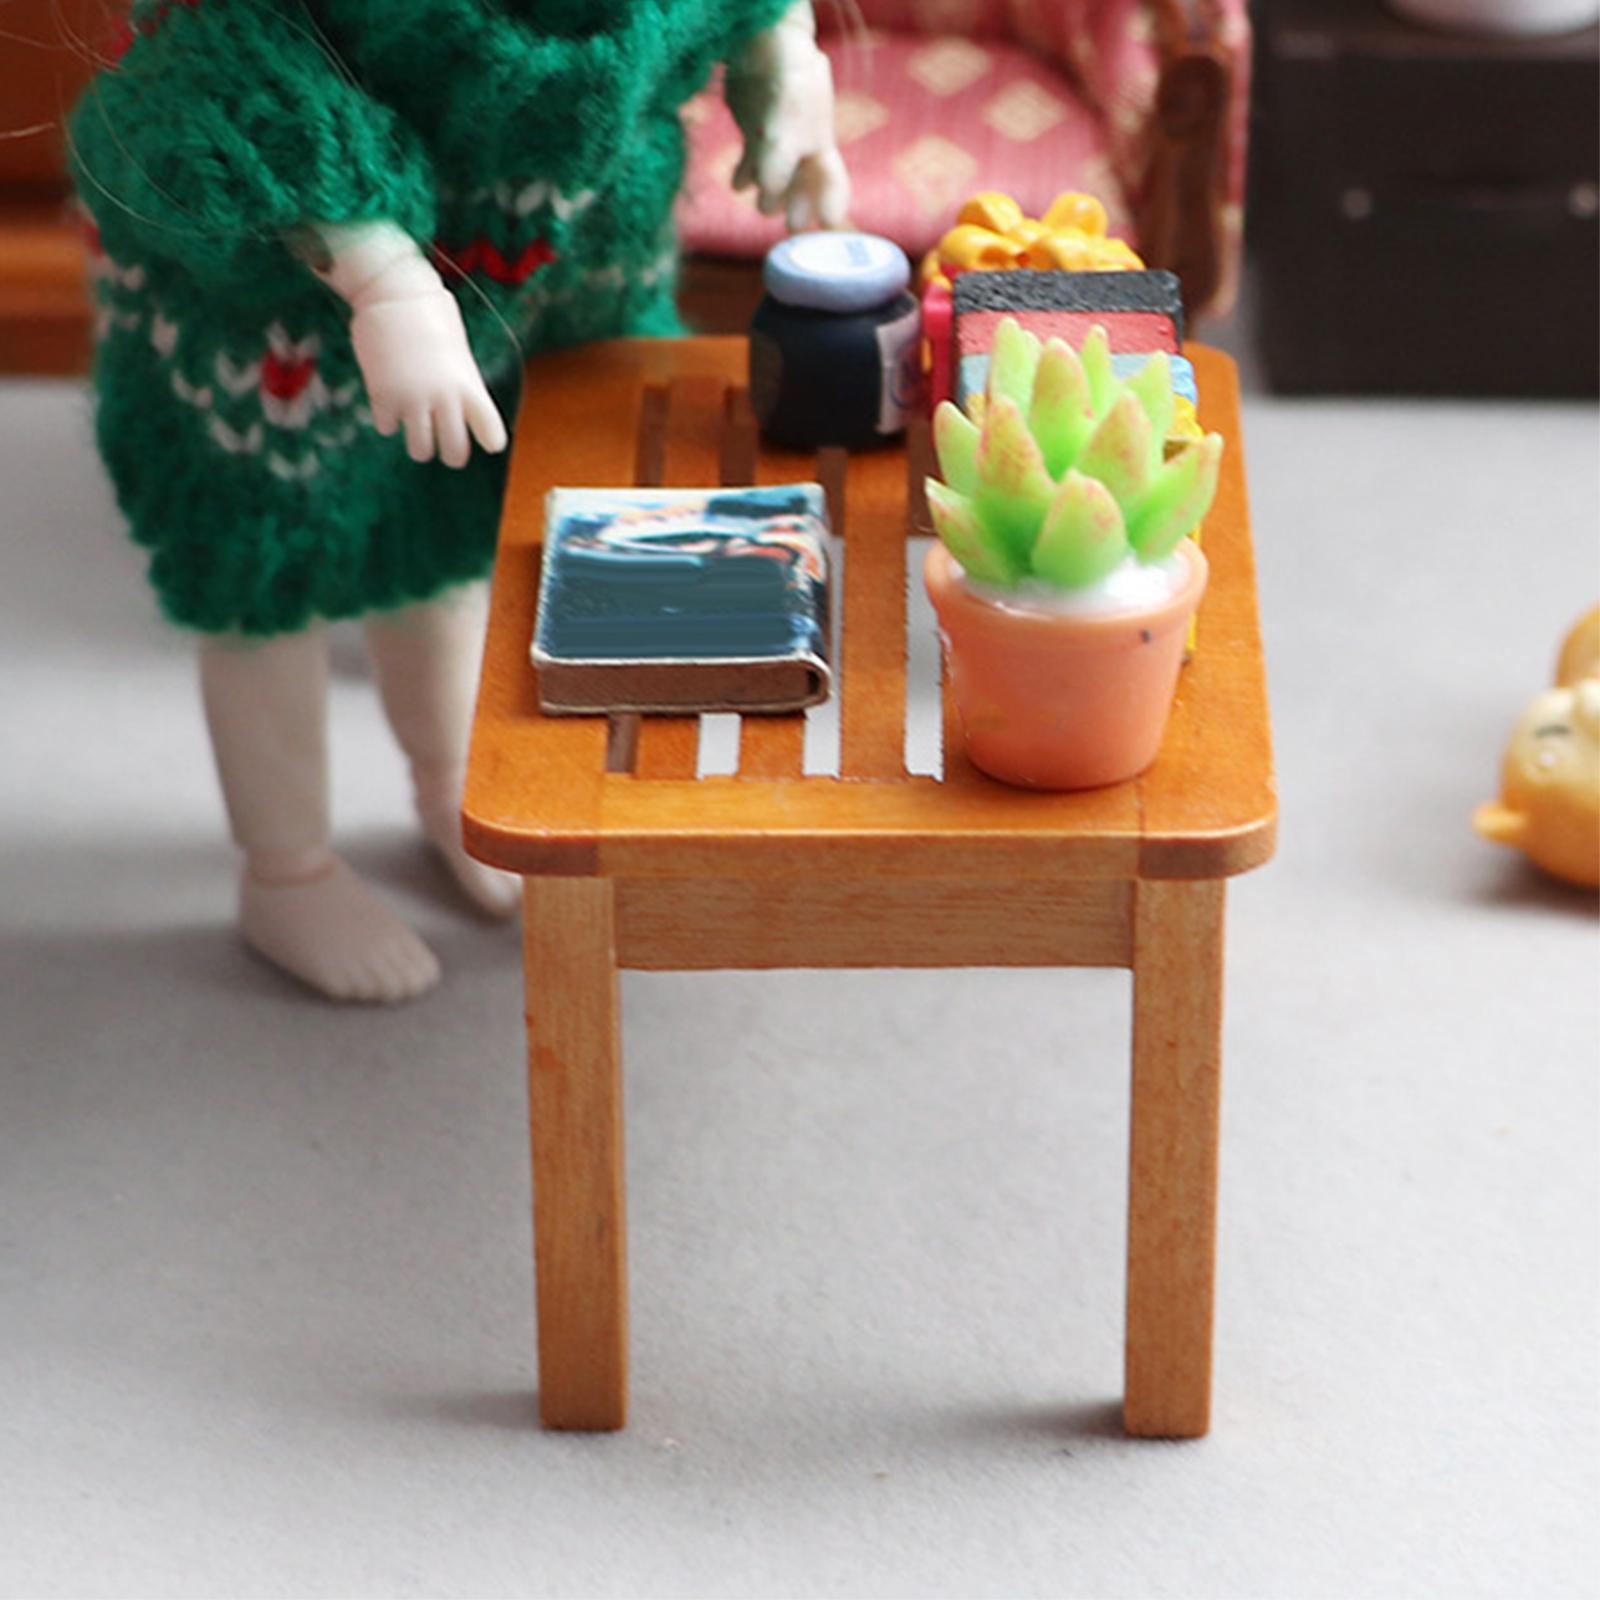 1:12 Scale Side Table Living Room Furniture Home Doll House Wooden Coffee Table Decor